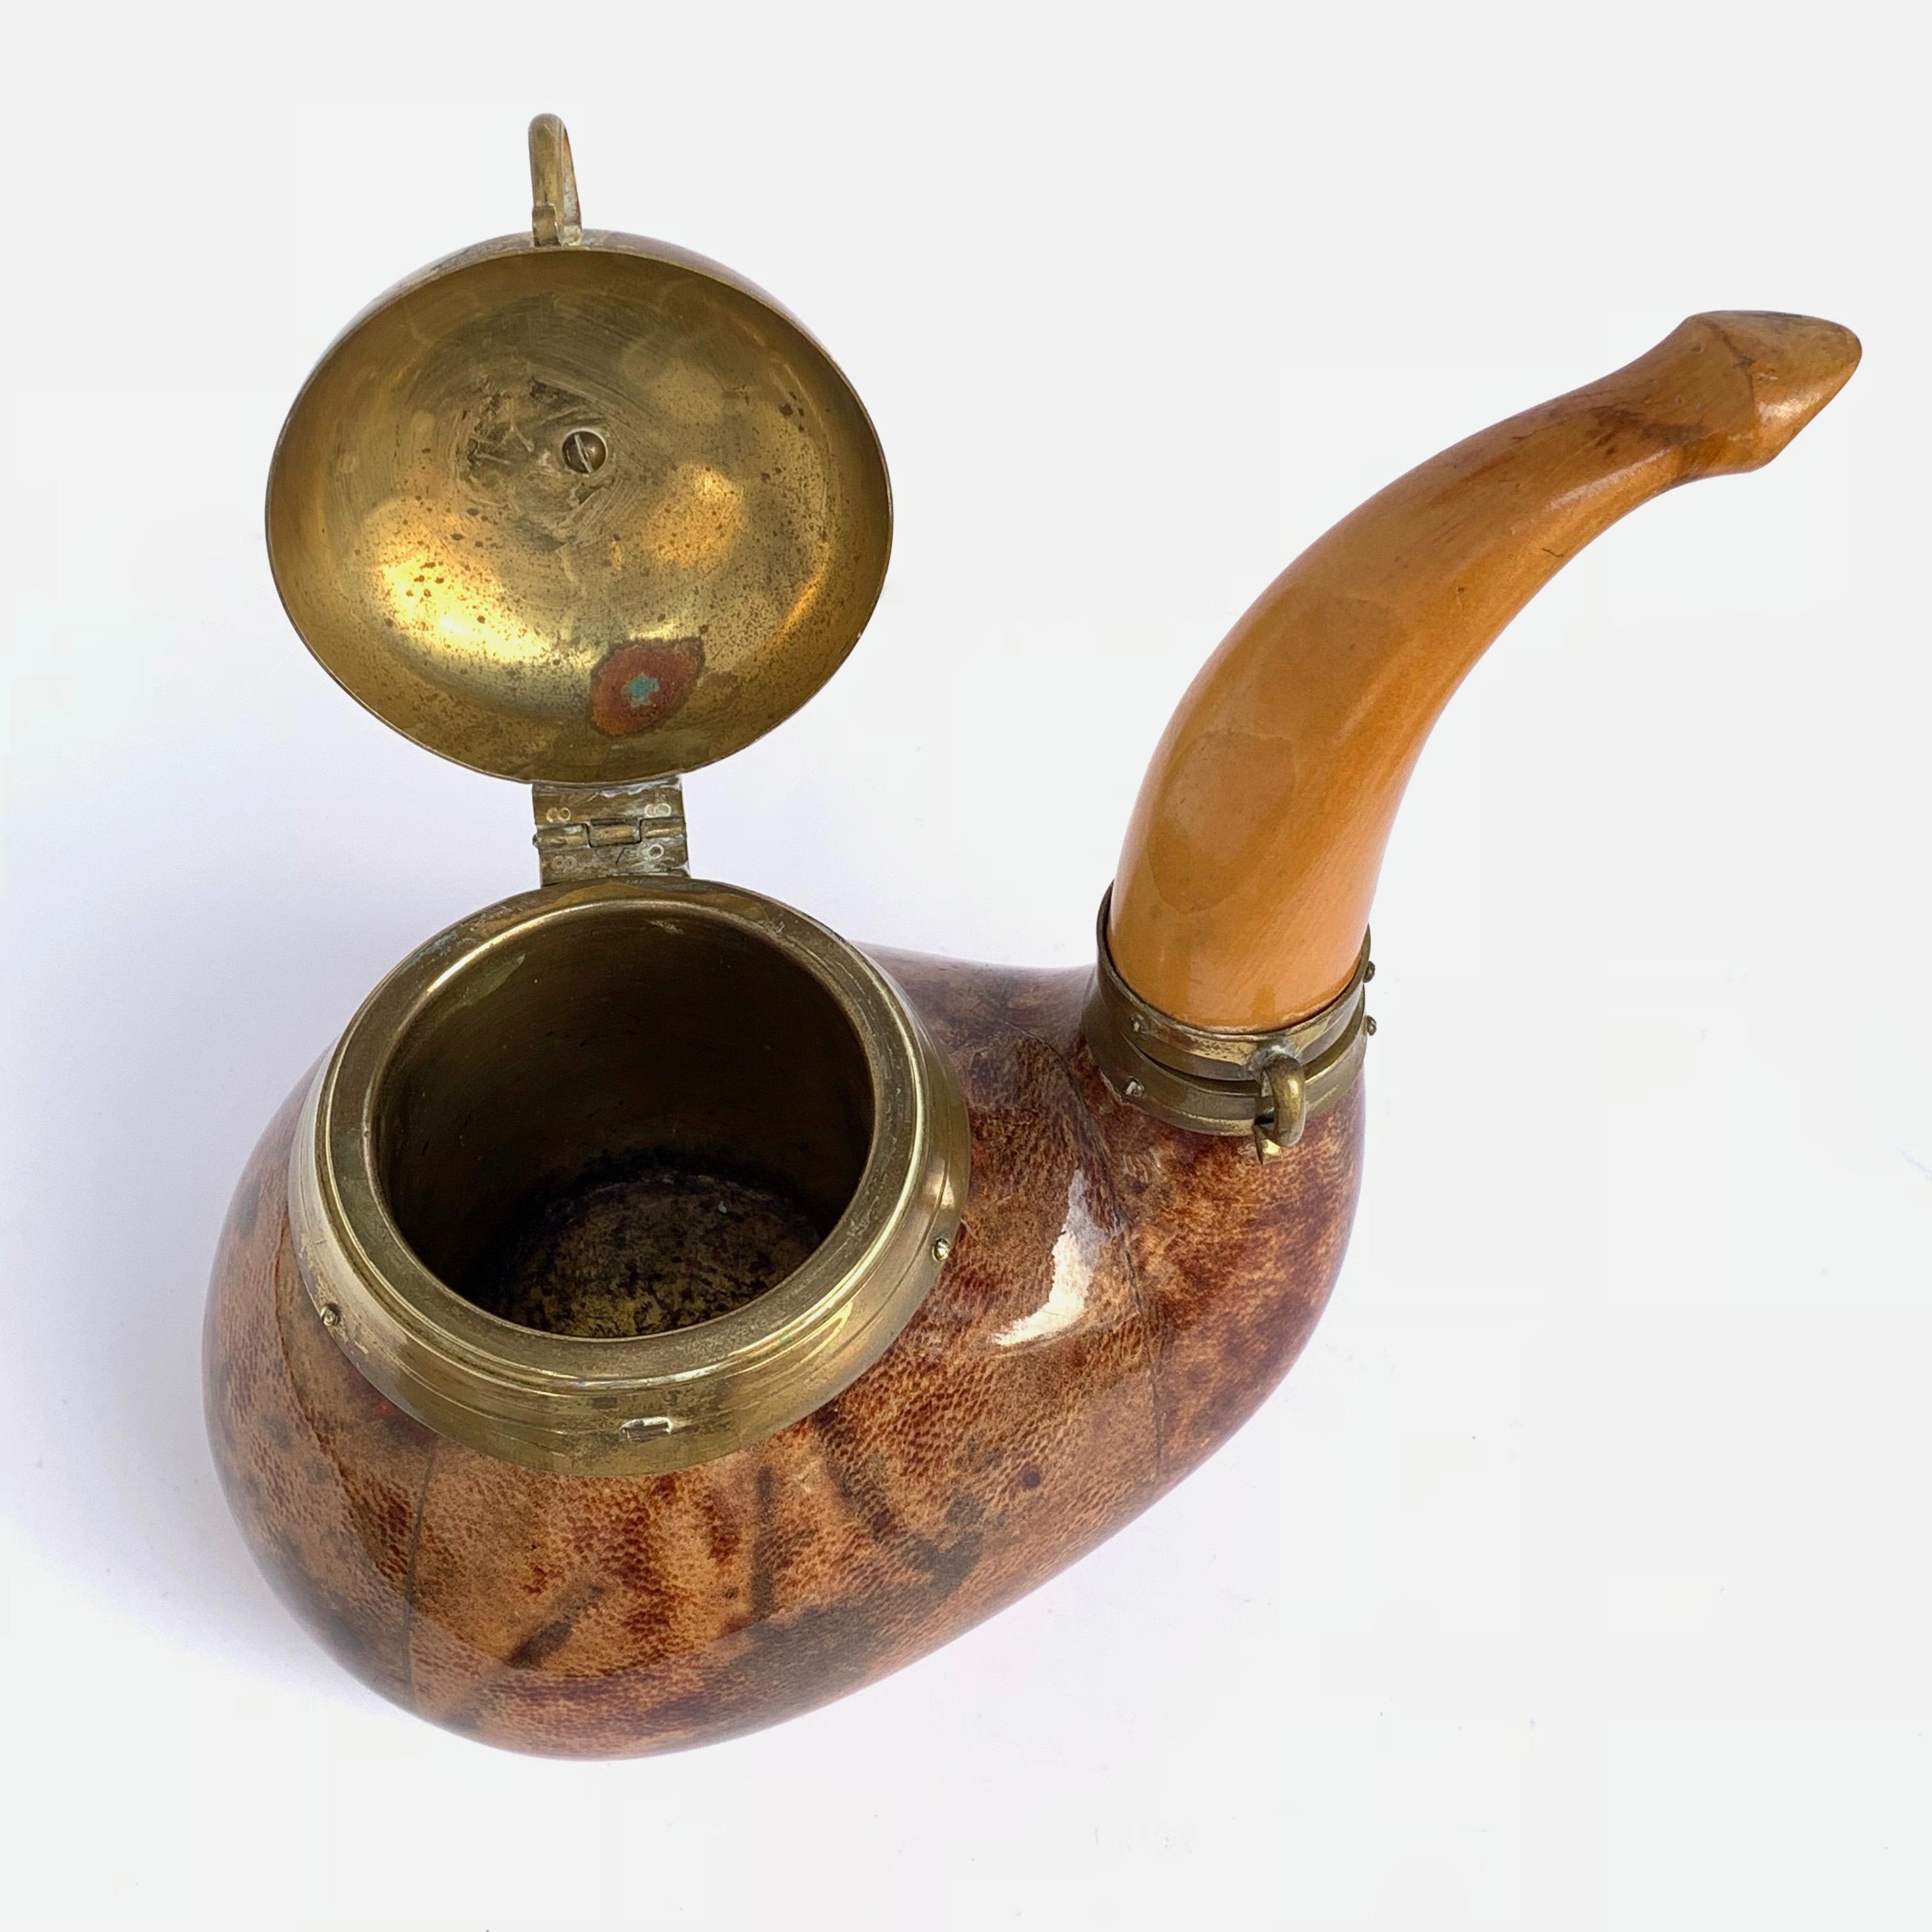 Italy 1940s Aldo Tura Goat Skin, Brass and Wood Tobacco Container, Pipe Shape For Sale 2